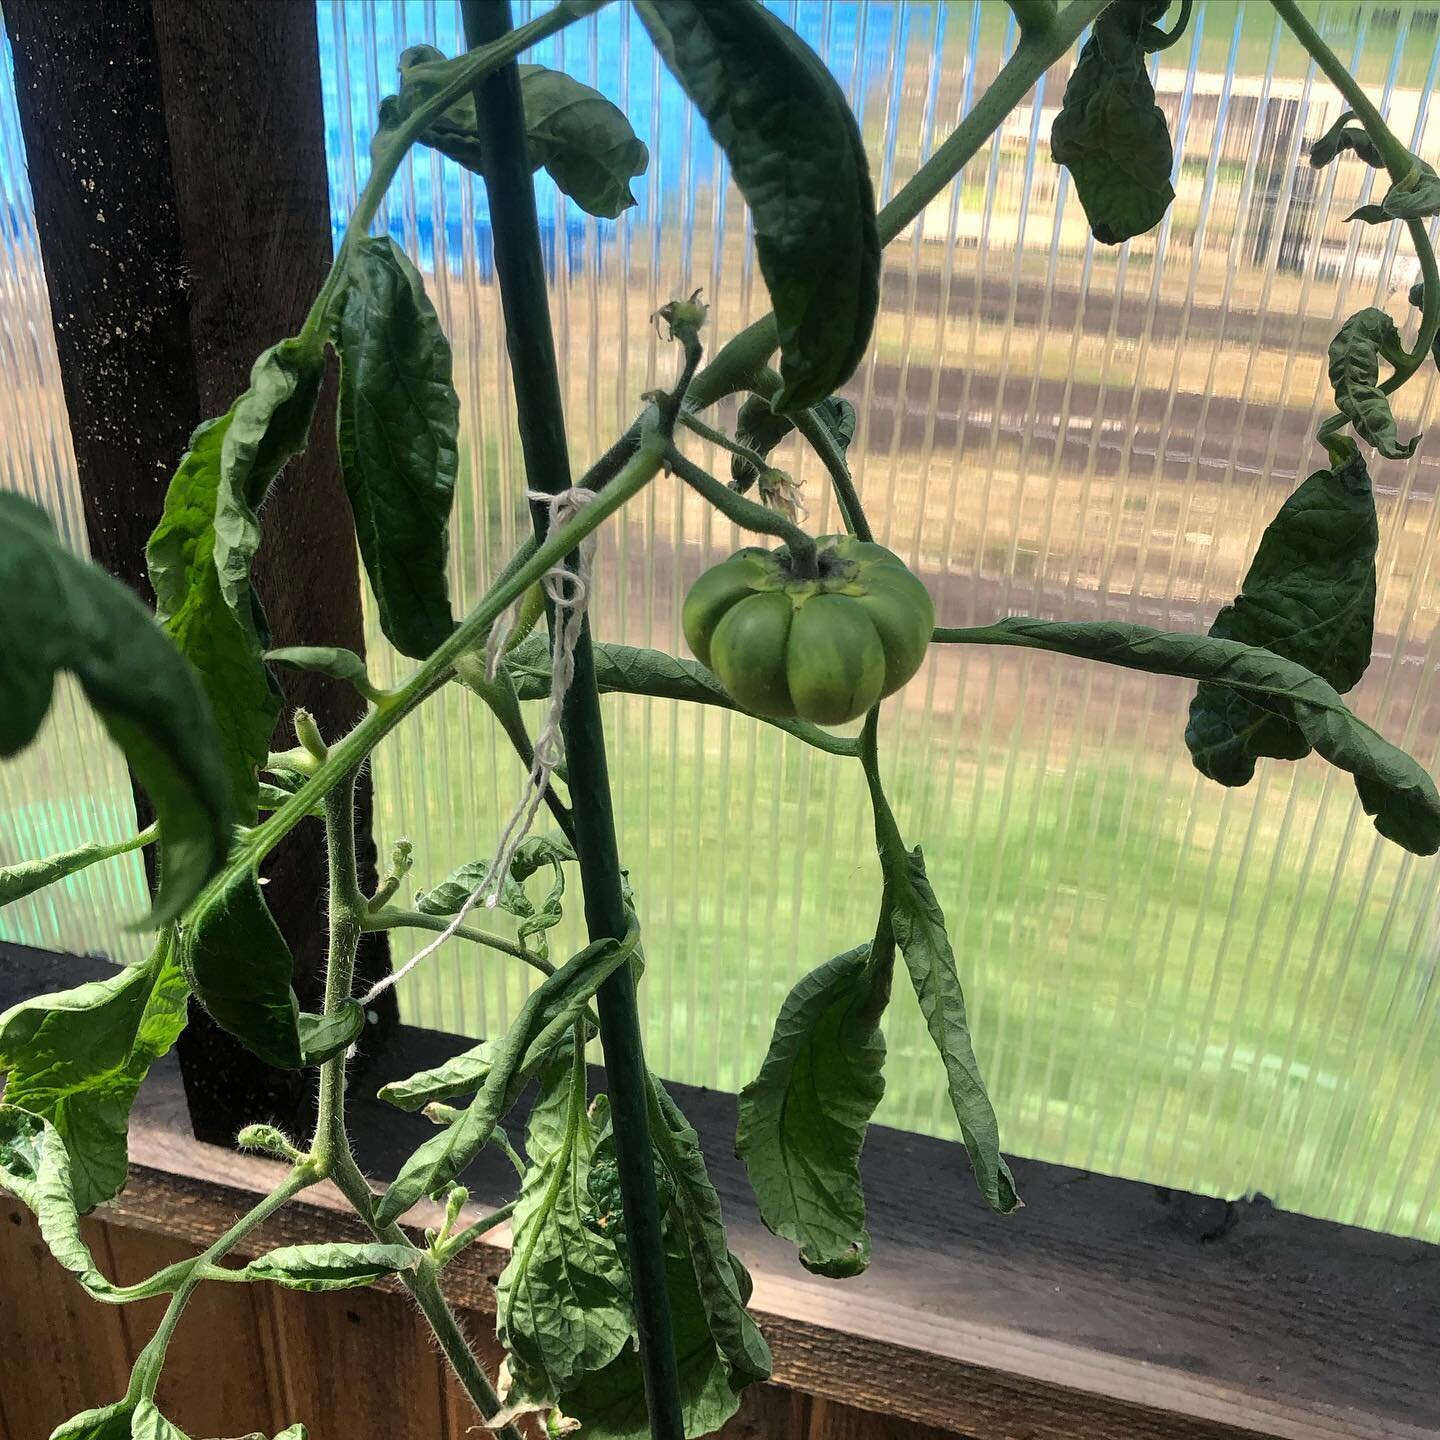 The tomatoes are starting to come in! 🍅 
#tomatoes #tomatoes🍅 #tomatoplant #tomatogarden #tomatogardening #tomatogardener #tomatoe #tomatolove #tomatoharvest #tomatolover #tomatofest #greenhouse #greenhouses #gardening #gardeninglife #gardening #gr